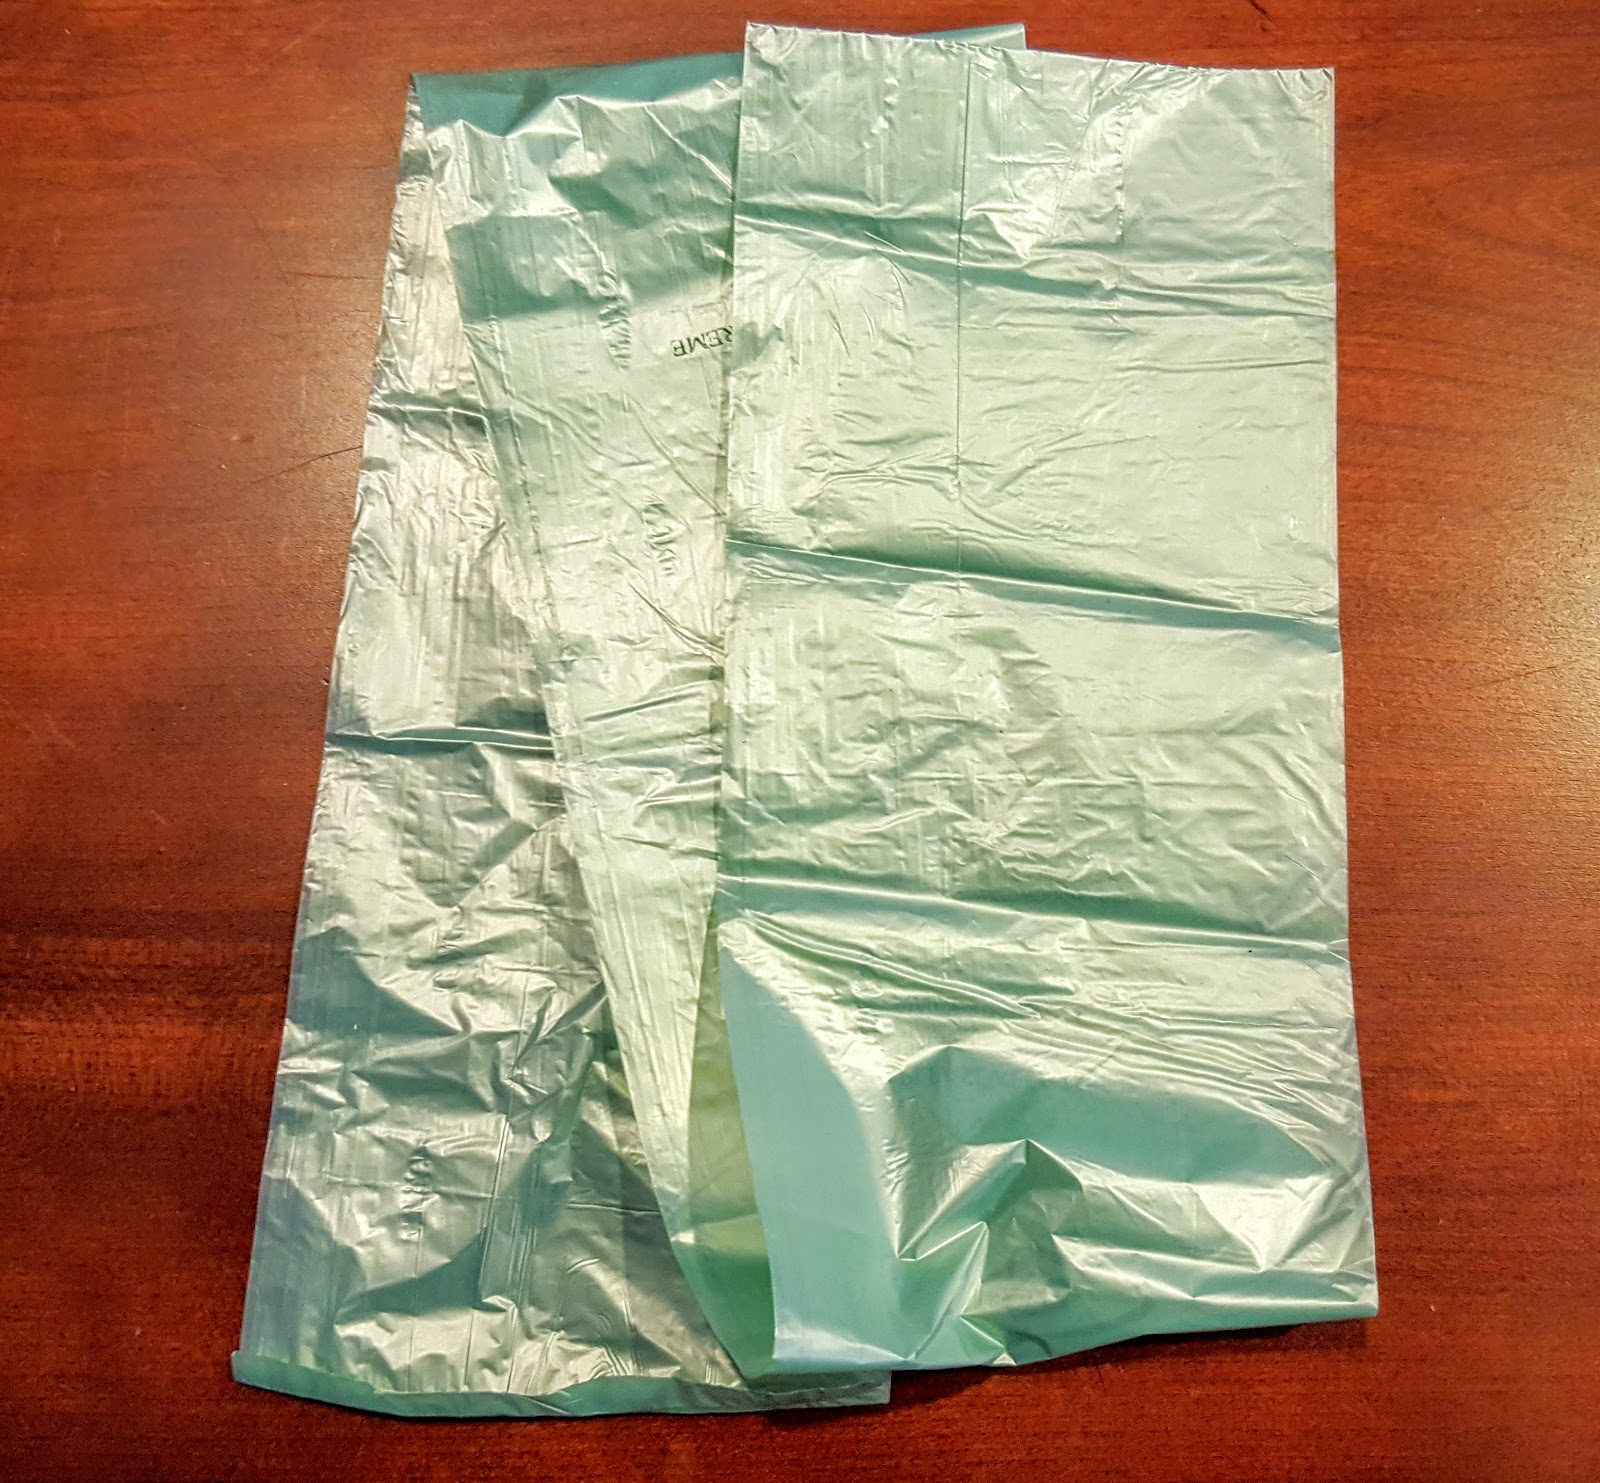 Ben's Journal: Never Underestimate the Value of a Simple Plastic Bag